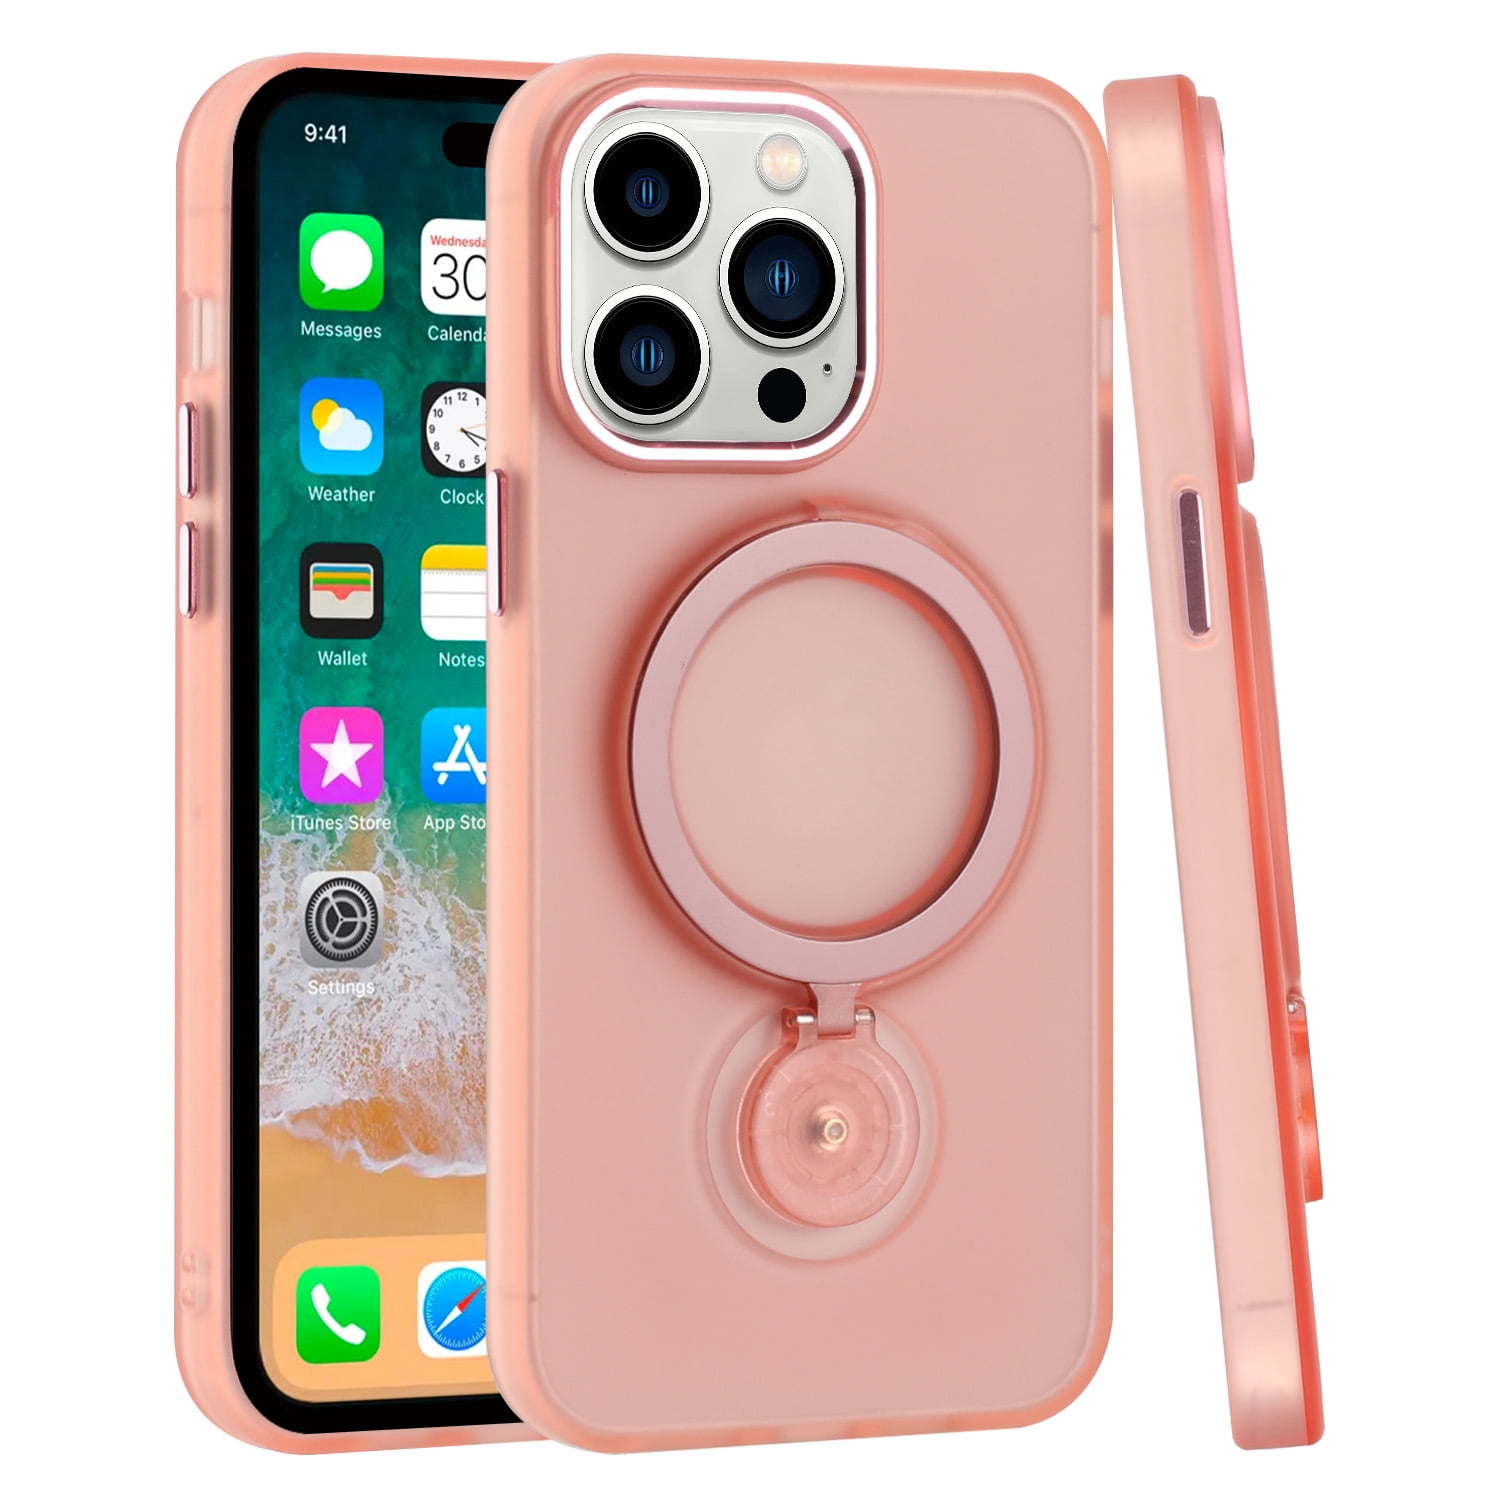 For Apple iPhone 12 Pro Max MagSafe Compatible with 360 degree Circle Ring Stand Magnetic Kickstand Slim Hybrid Cover Xpm Phone Case Pink 2c0ddbc6 5272 490b 8106 3246196ee095.e56d8ae508bb6a32c9a264549fc5275d